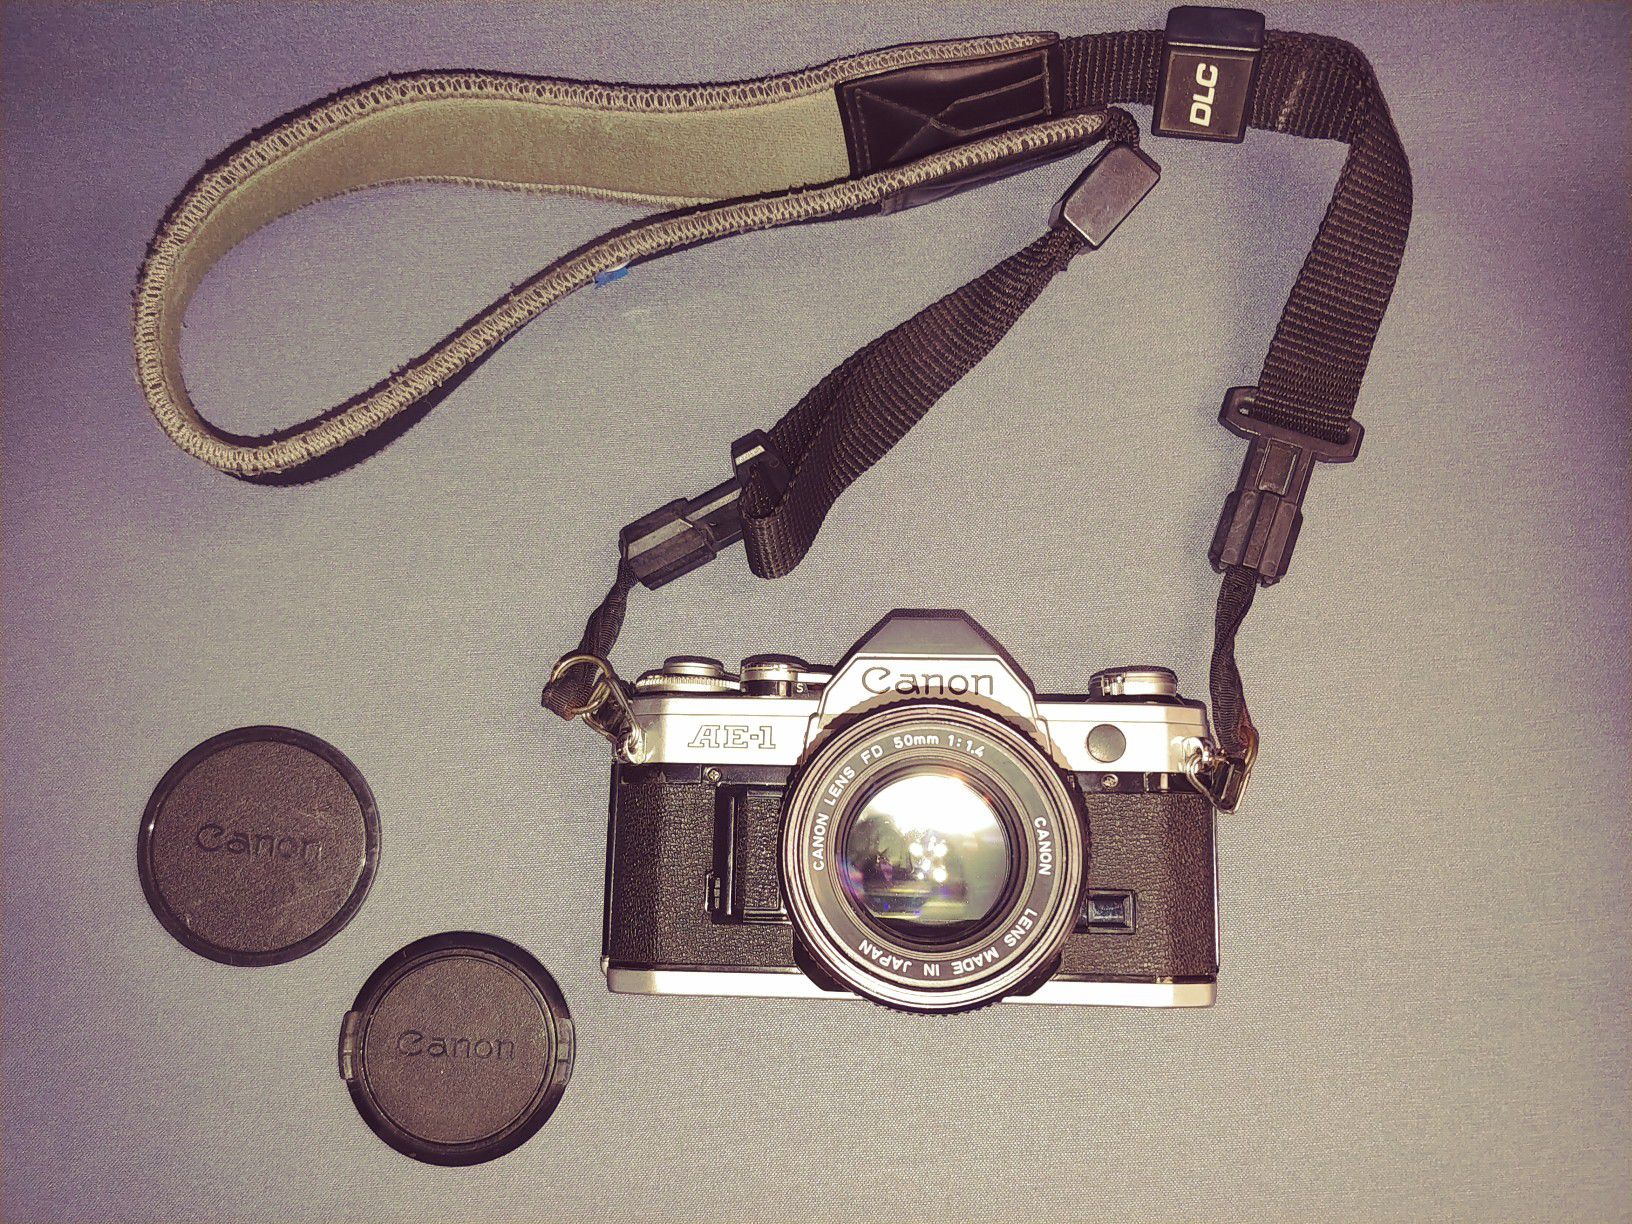 CANON AE-1 Film SLR Camera with CANON FD 50m0m F1.4 Lens and Vivitar 20-135mm F3.5-4.5 Zoom Lens